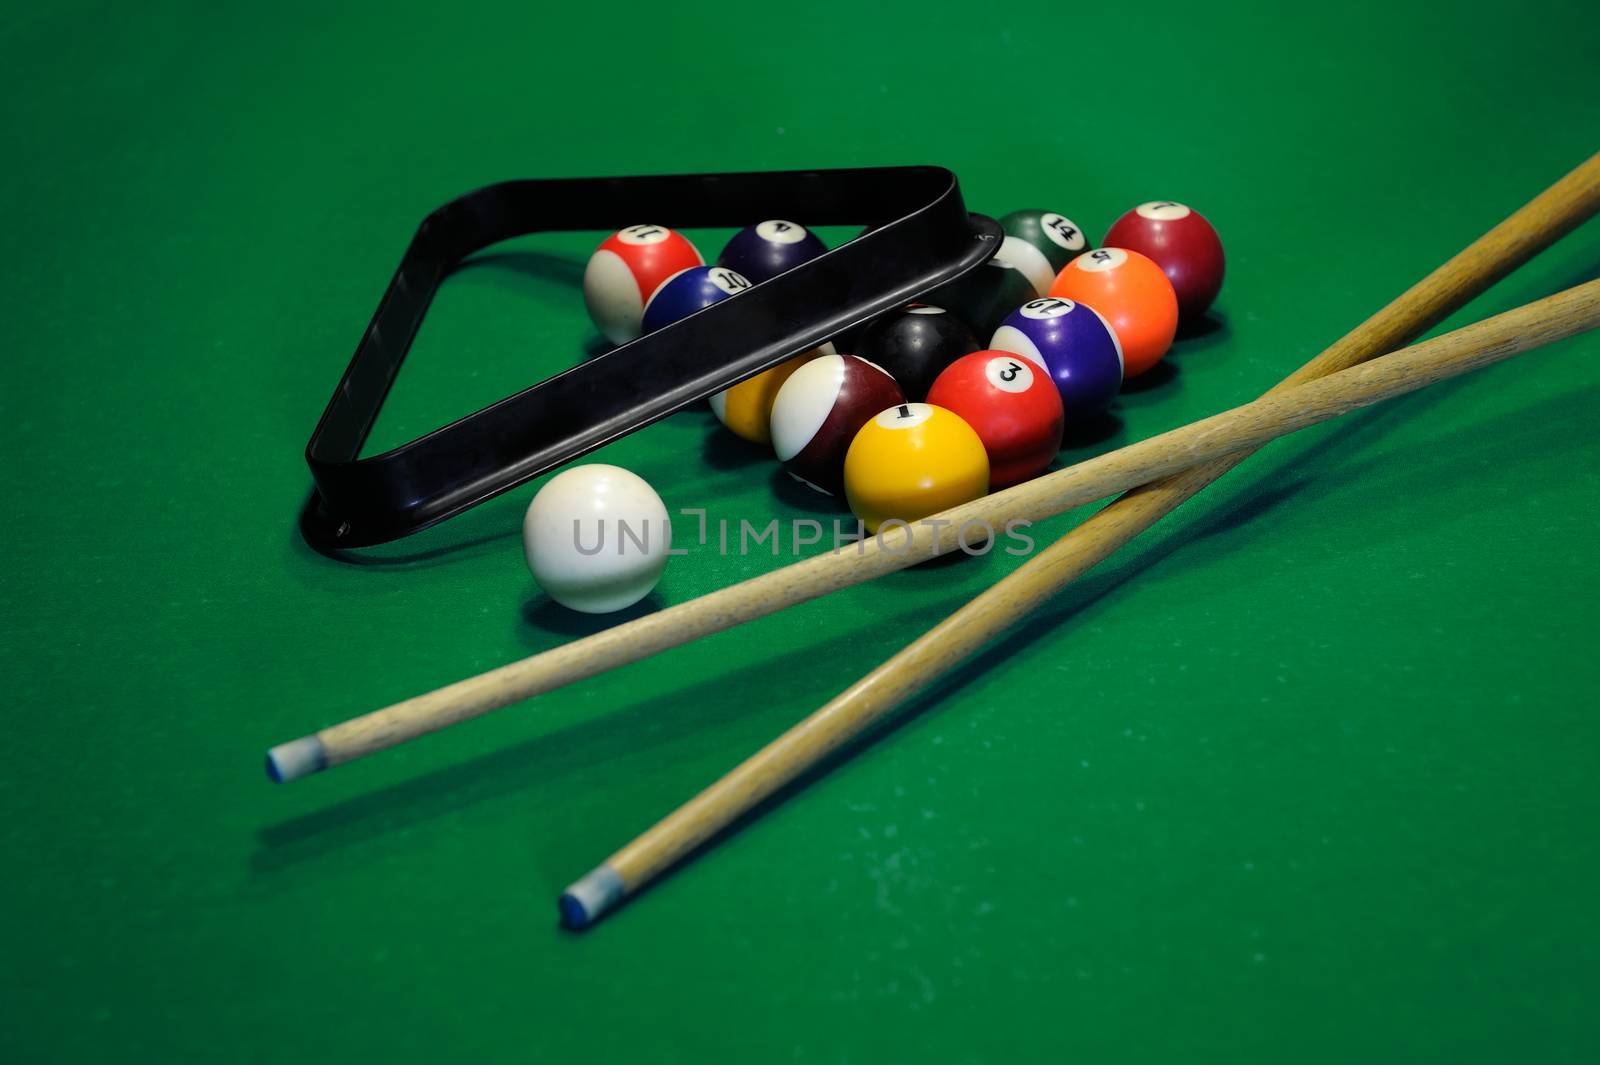 Top view of billiard balls and cues on green table